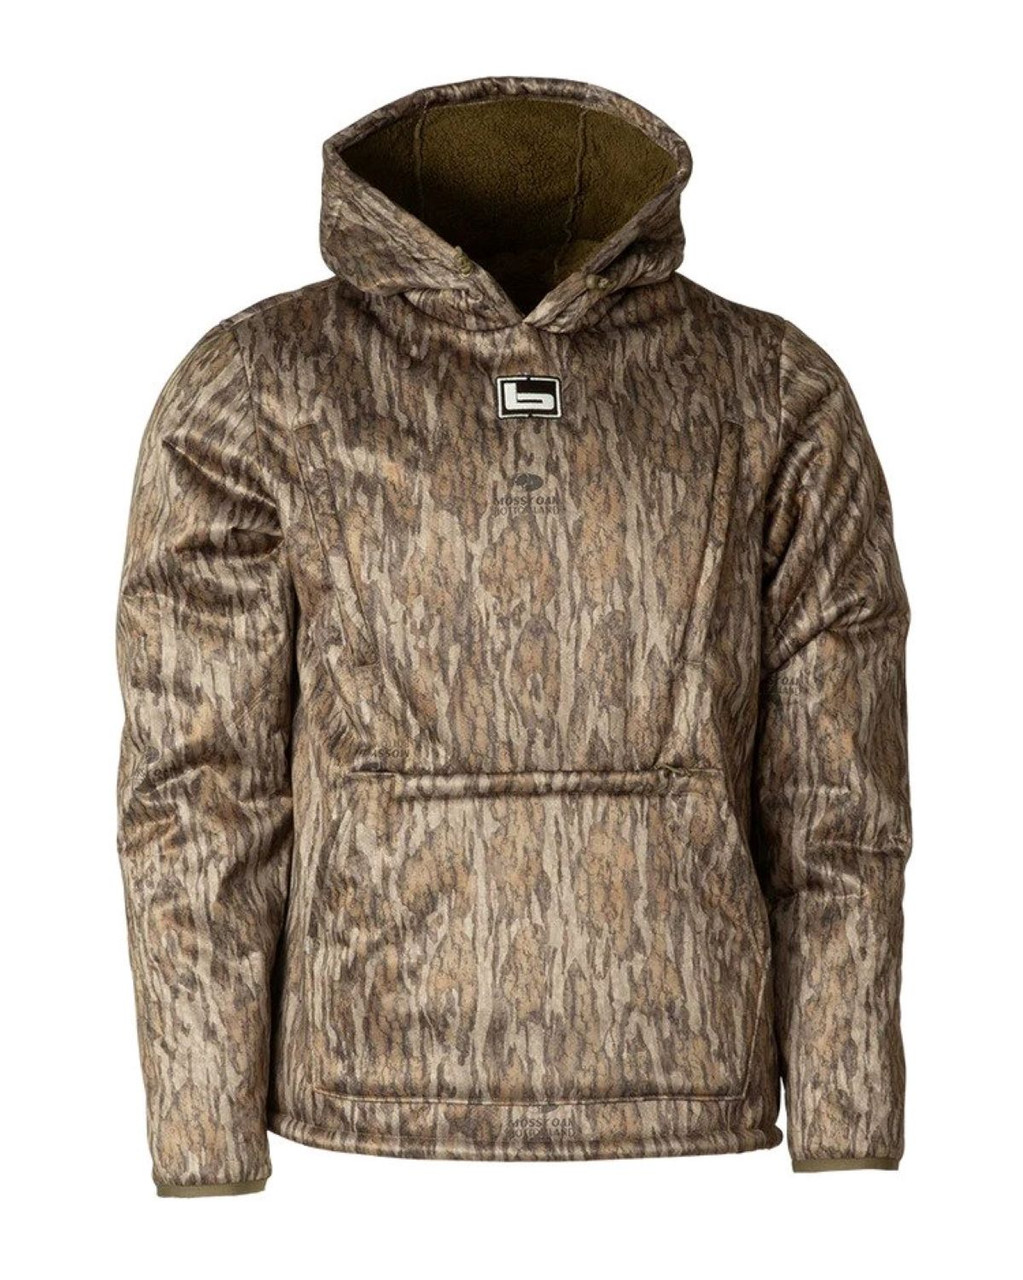 Banded Fanatech Softshell Hoodie Coral-Fleeced Lined - Bottomland - L